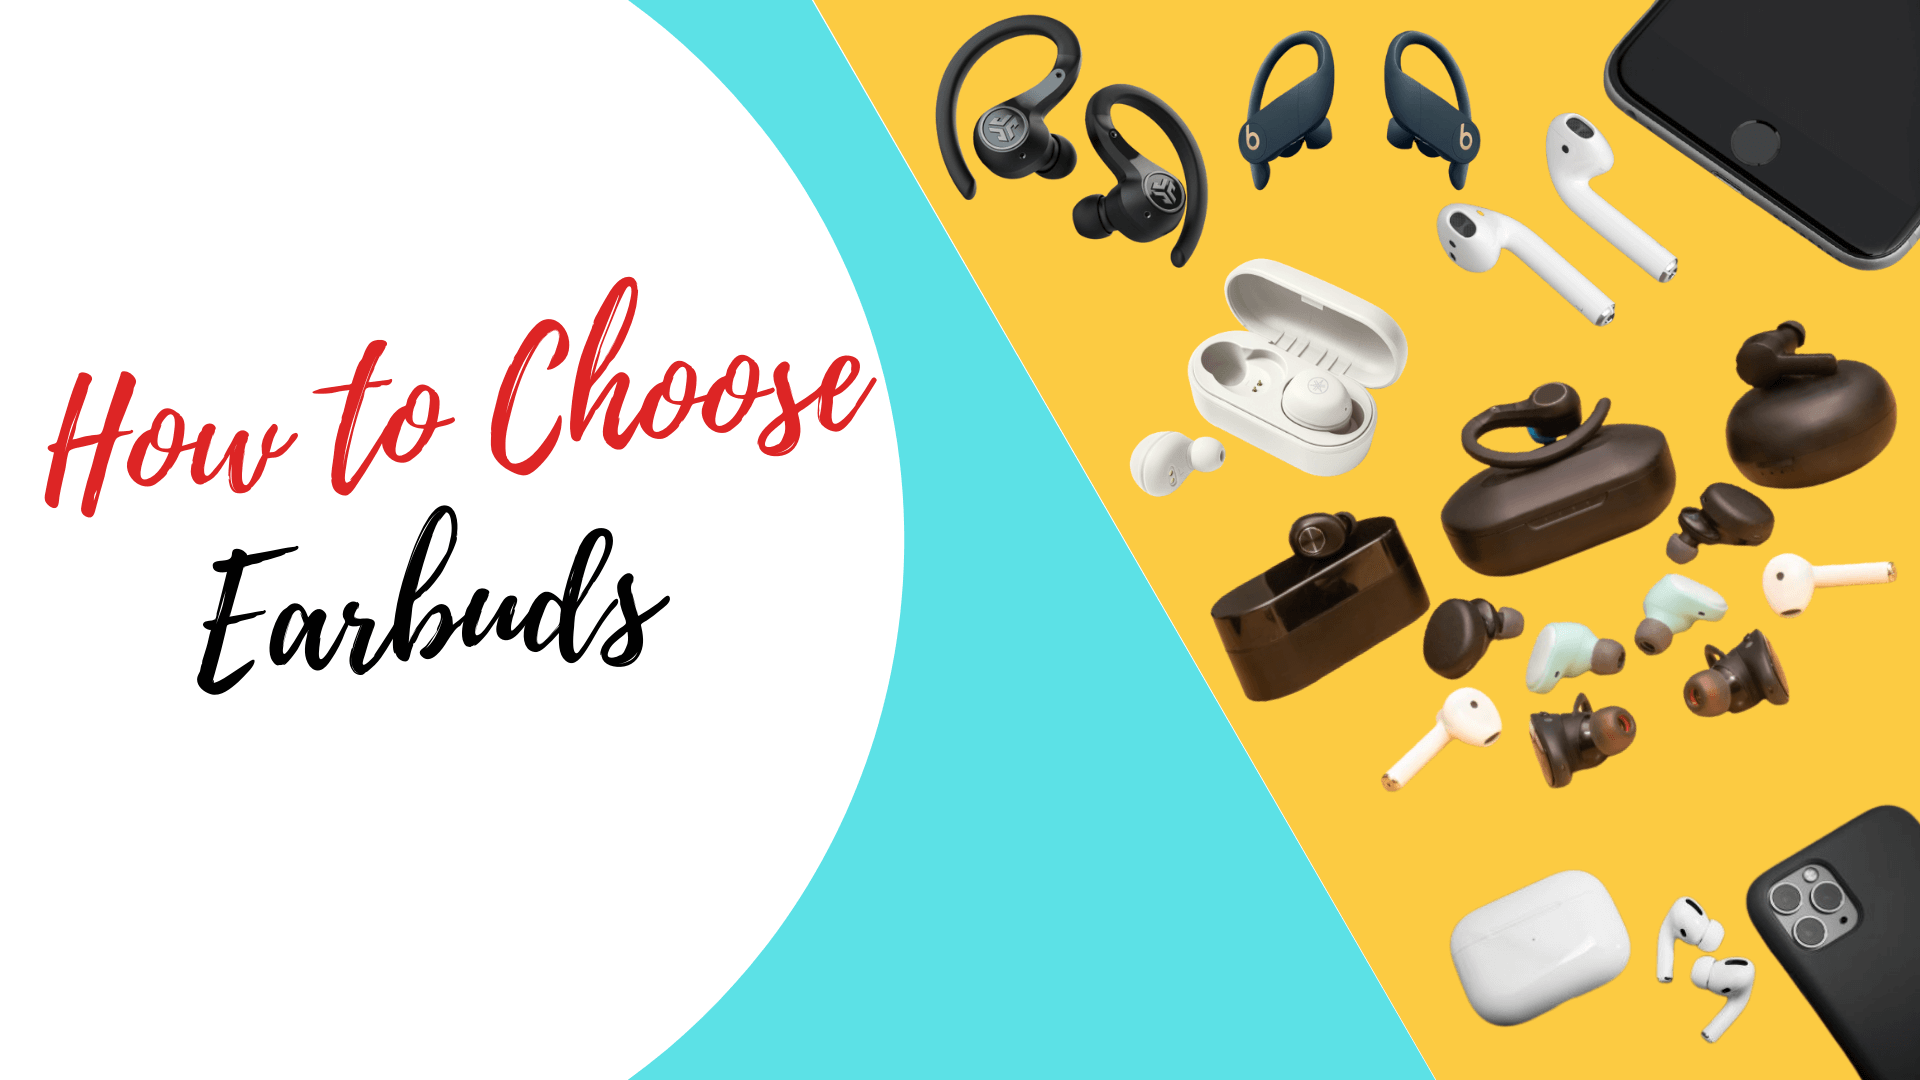 How to Choose Earbuds?